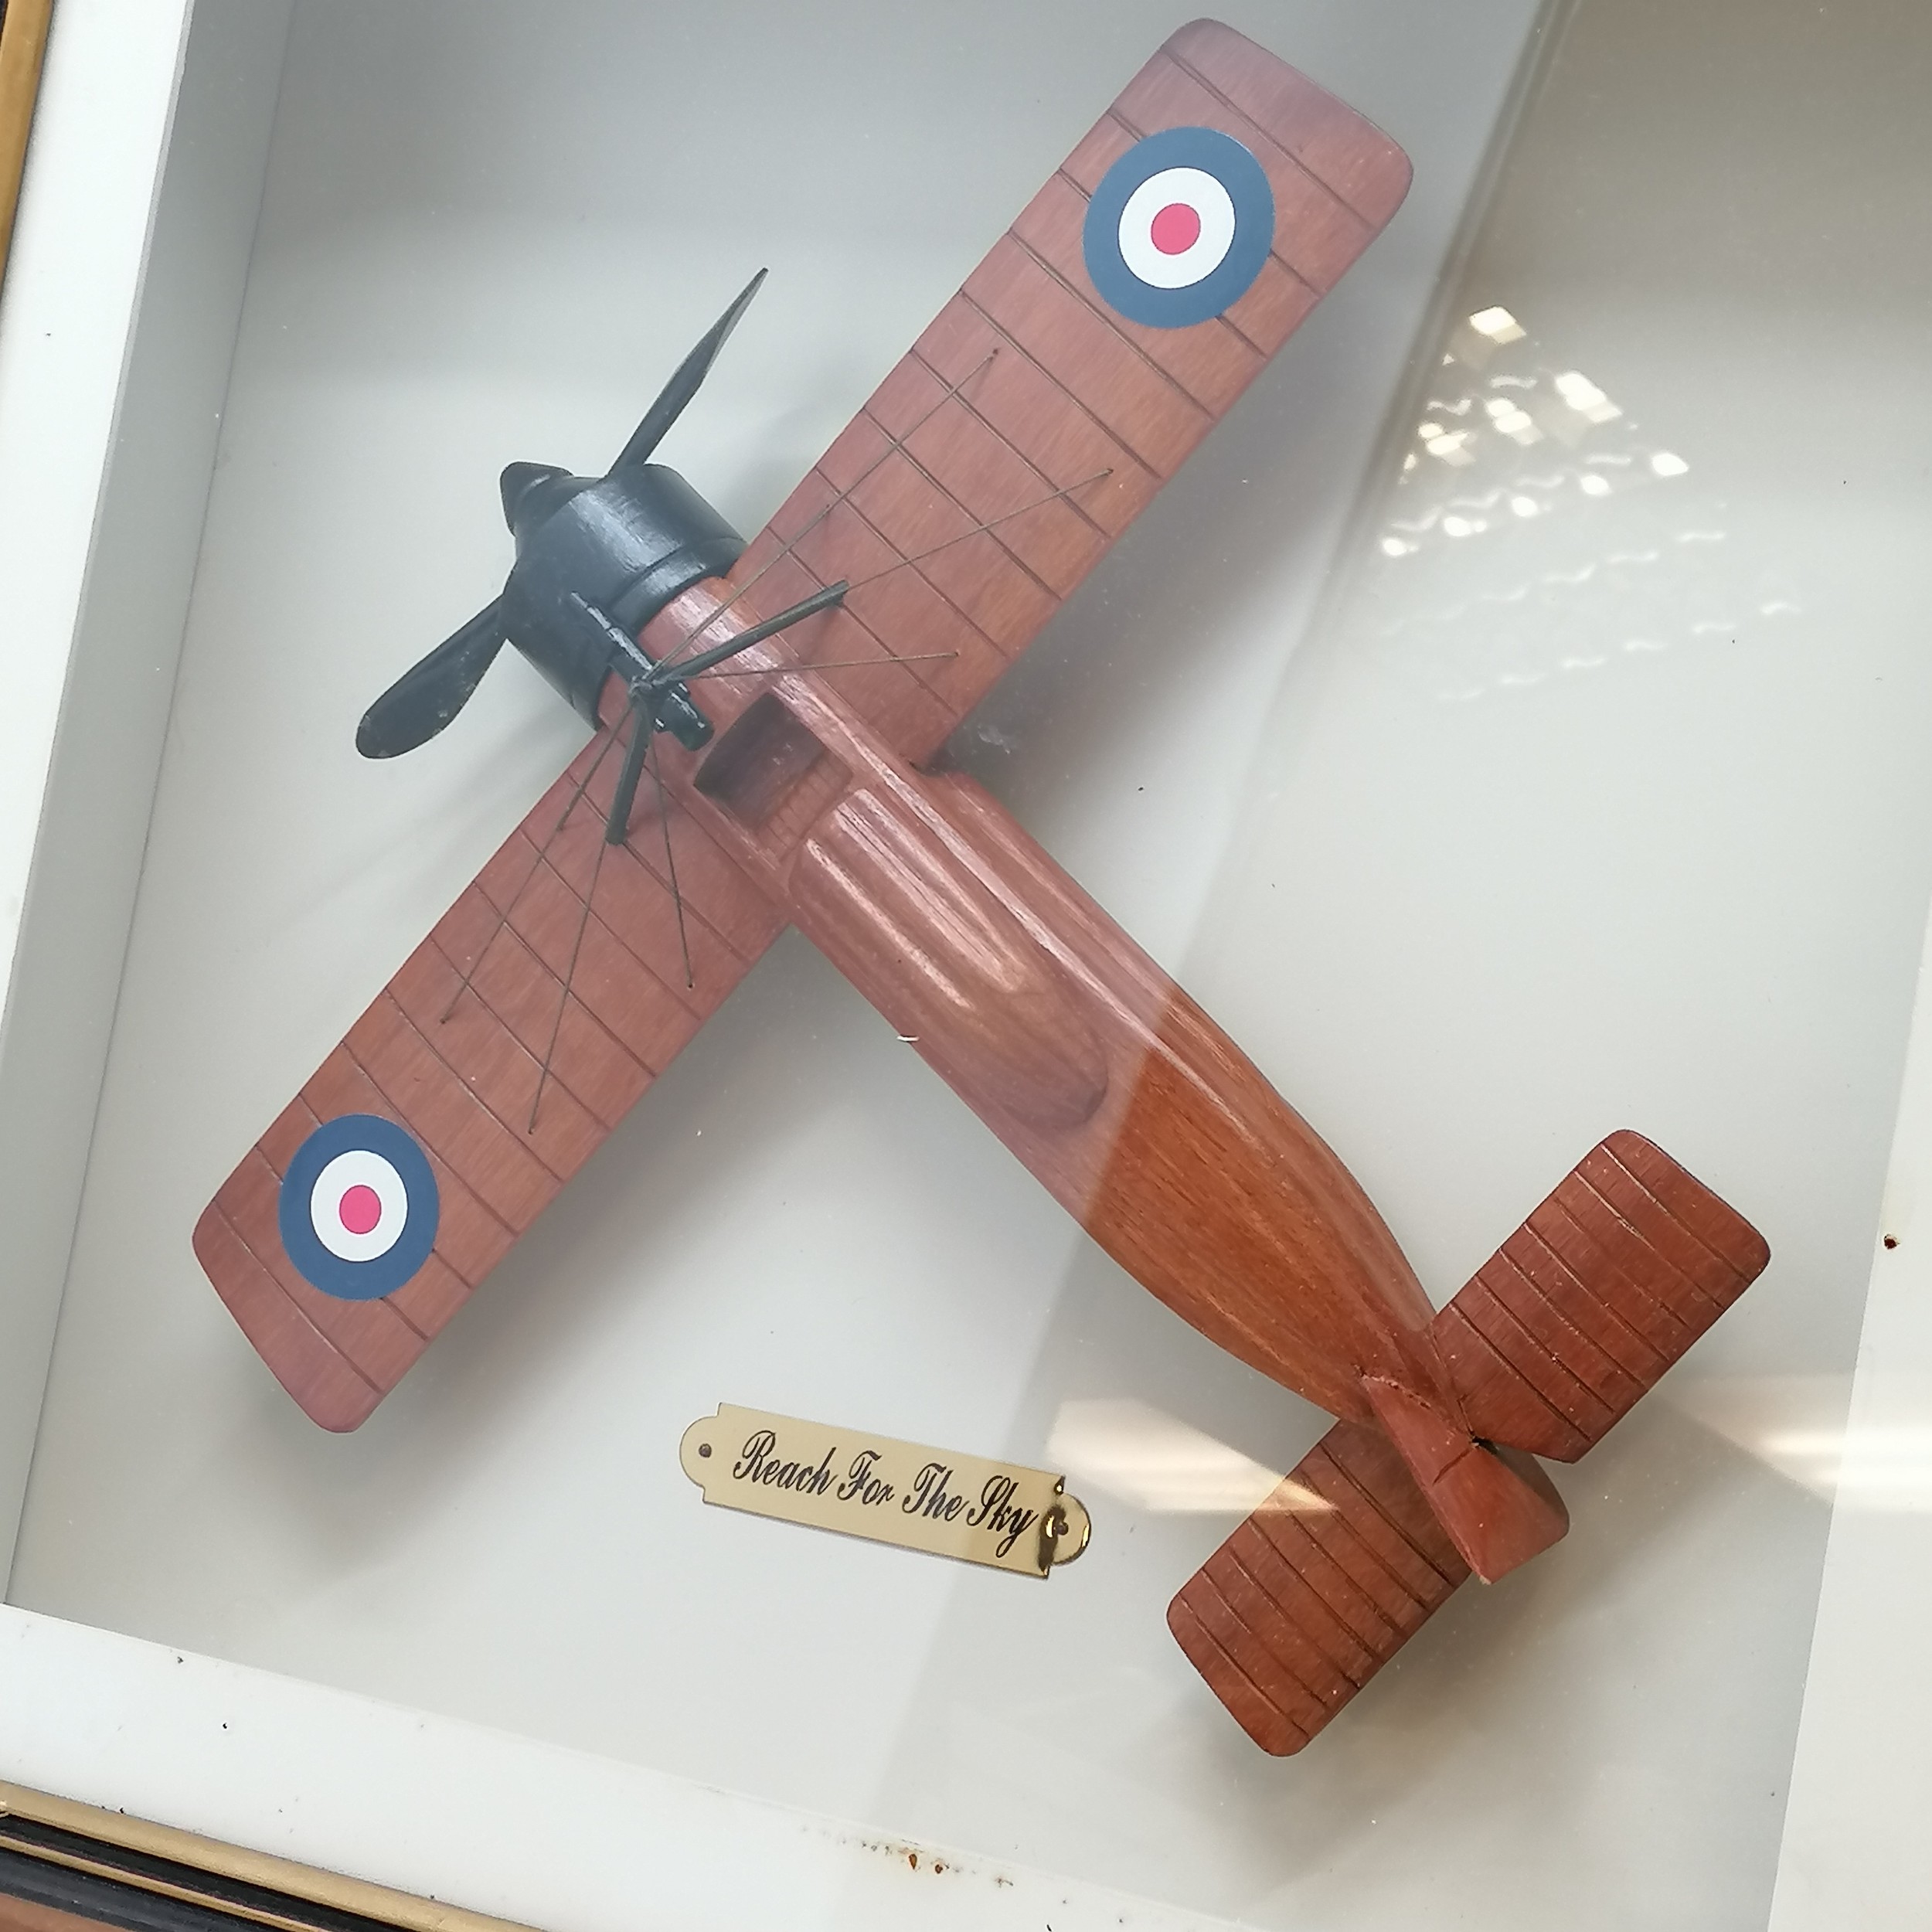 Box framed wooden model of a monoplane 'Reach for the sky' - frame 50cm square - Image 2 of 3